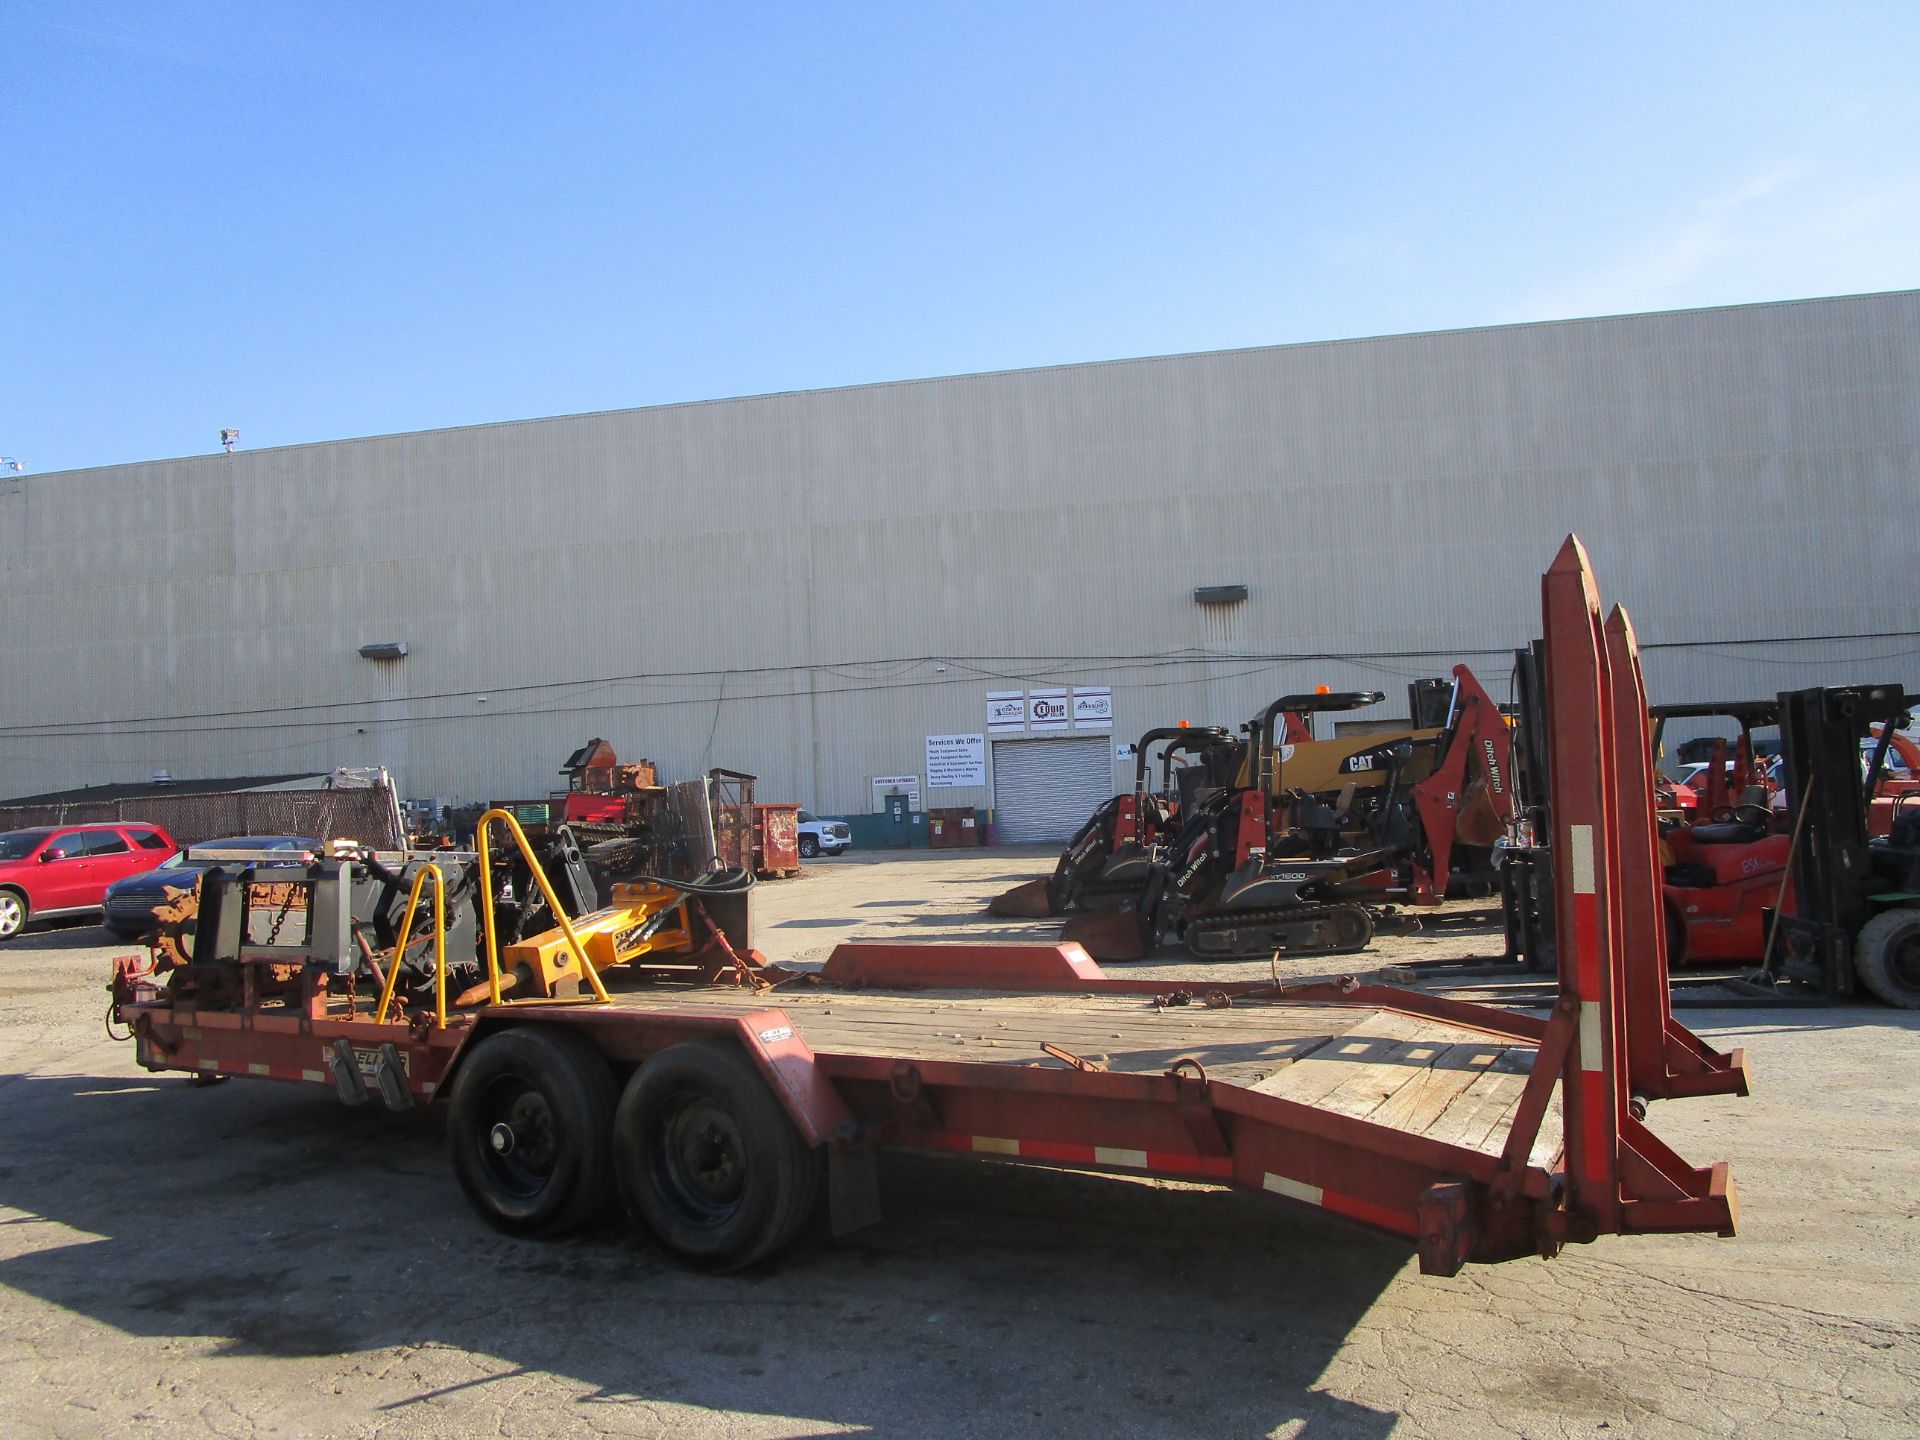 2011 Ditch Witch XT1600 Backhoe with Trailer and Attachments - Image 20 of 24